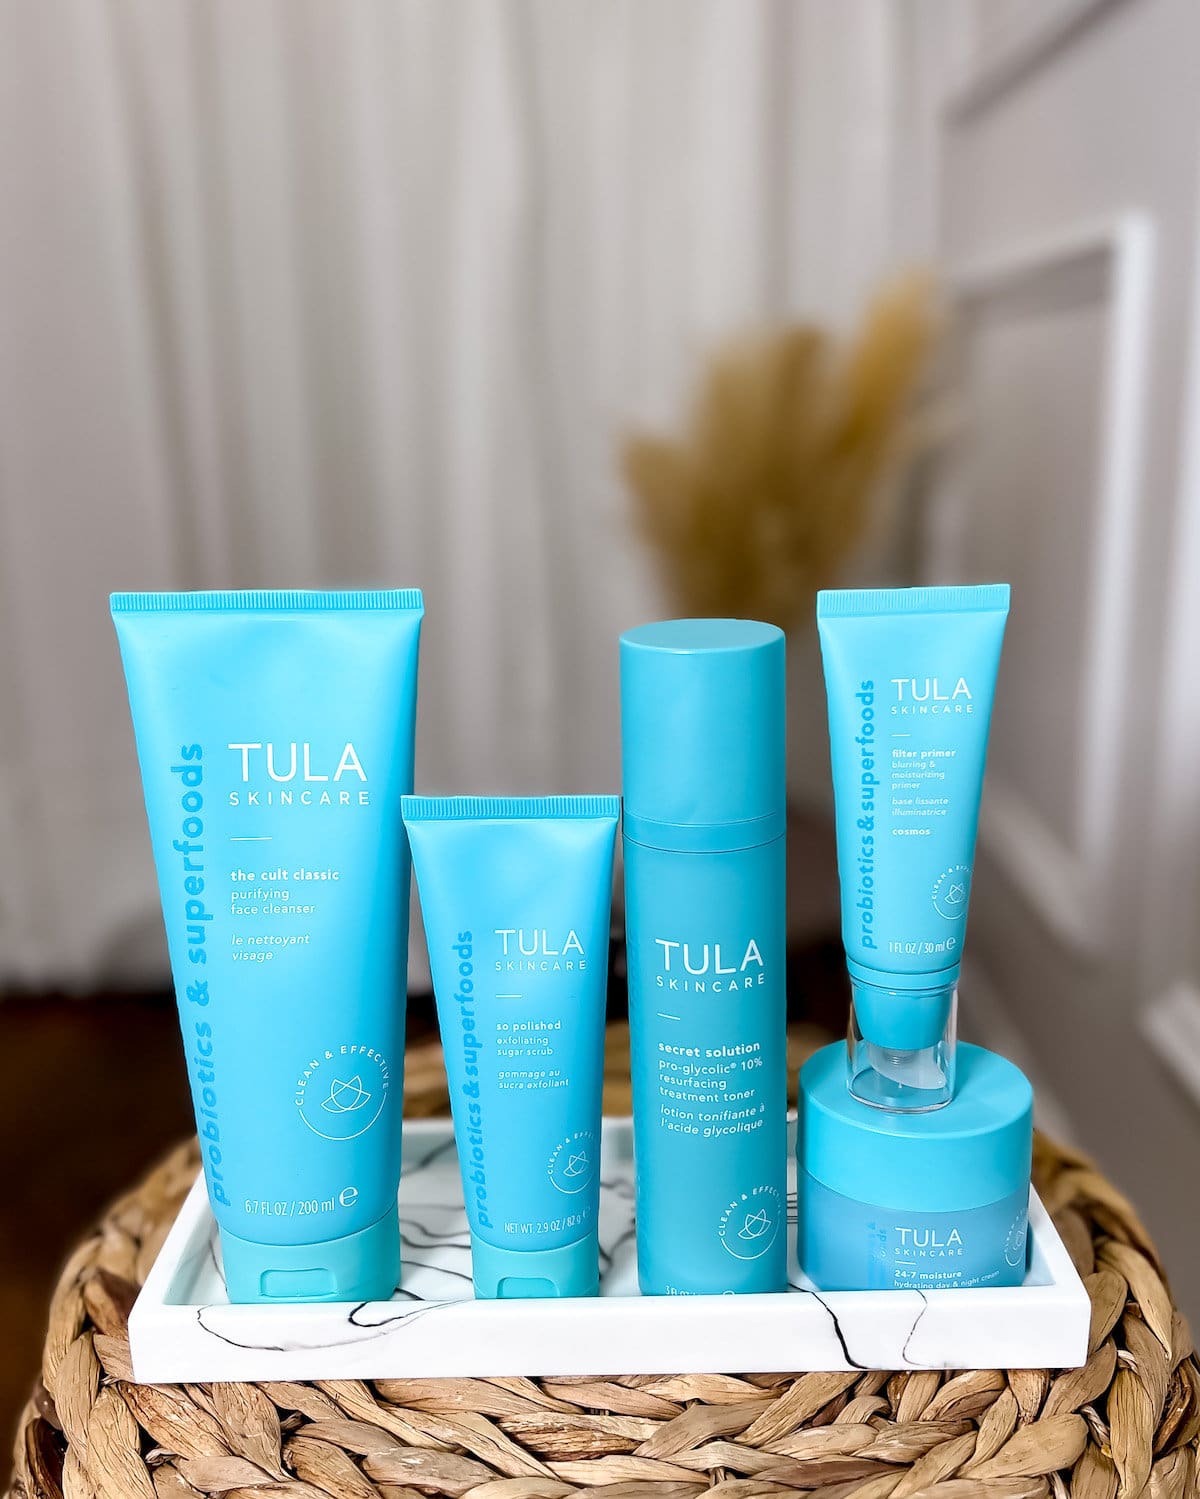 Tula skincare bestsellers I'm trying out